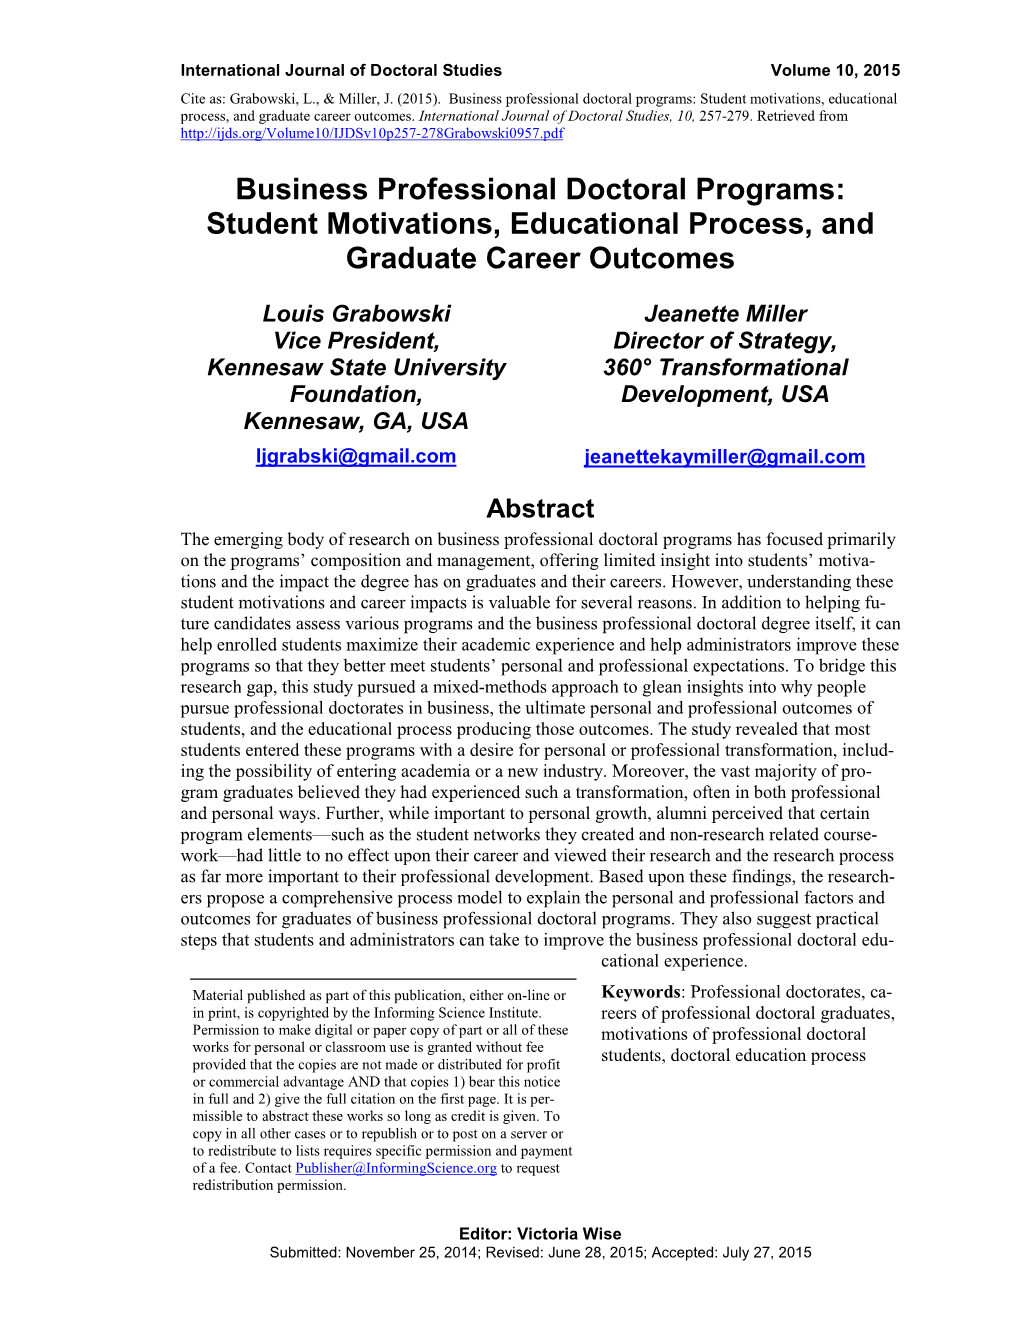 Business Professional Doctoral Programs: Student Motivations, Educational Process, and Graduate Career Outcomes